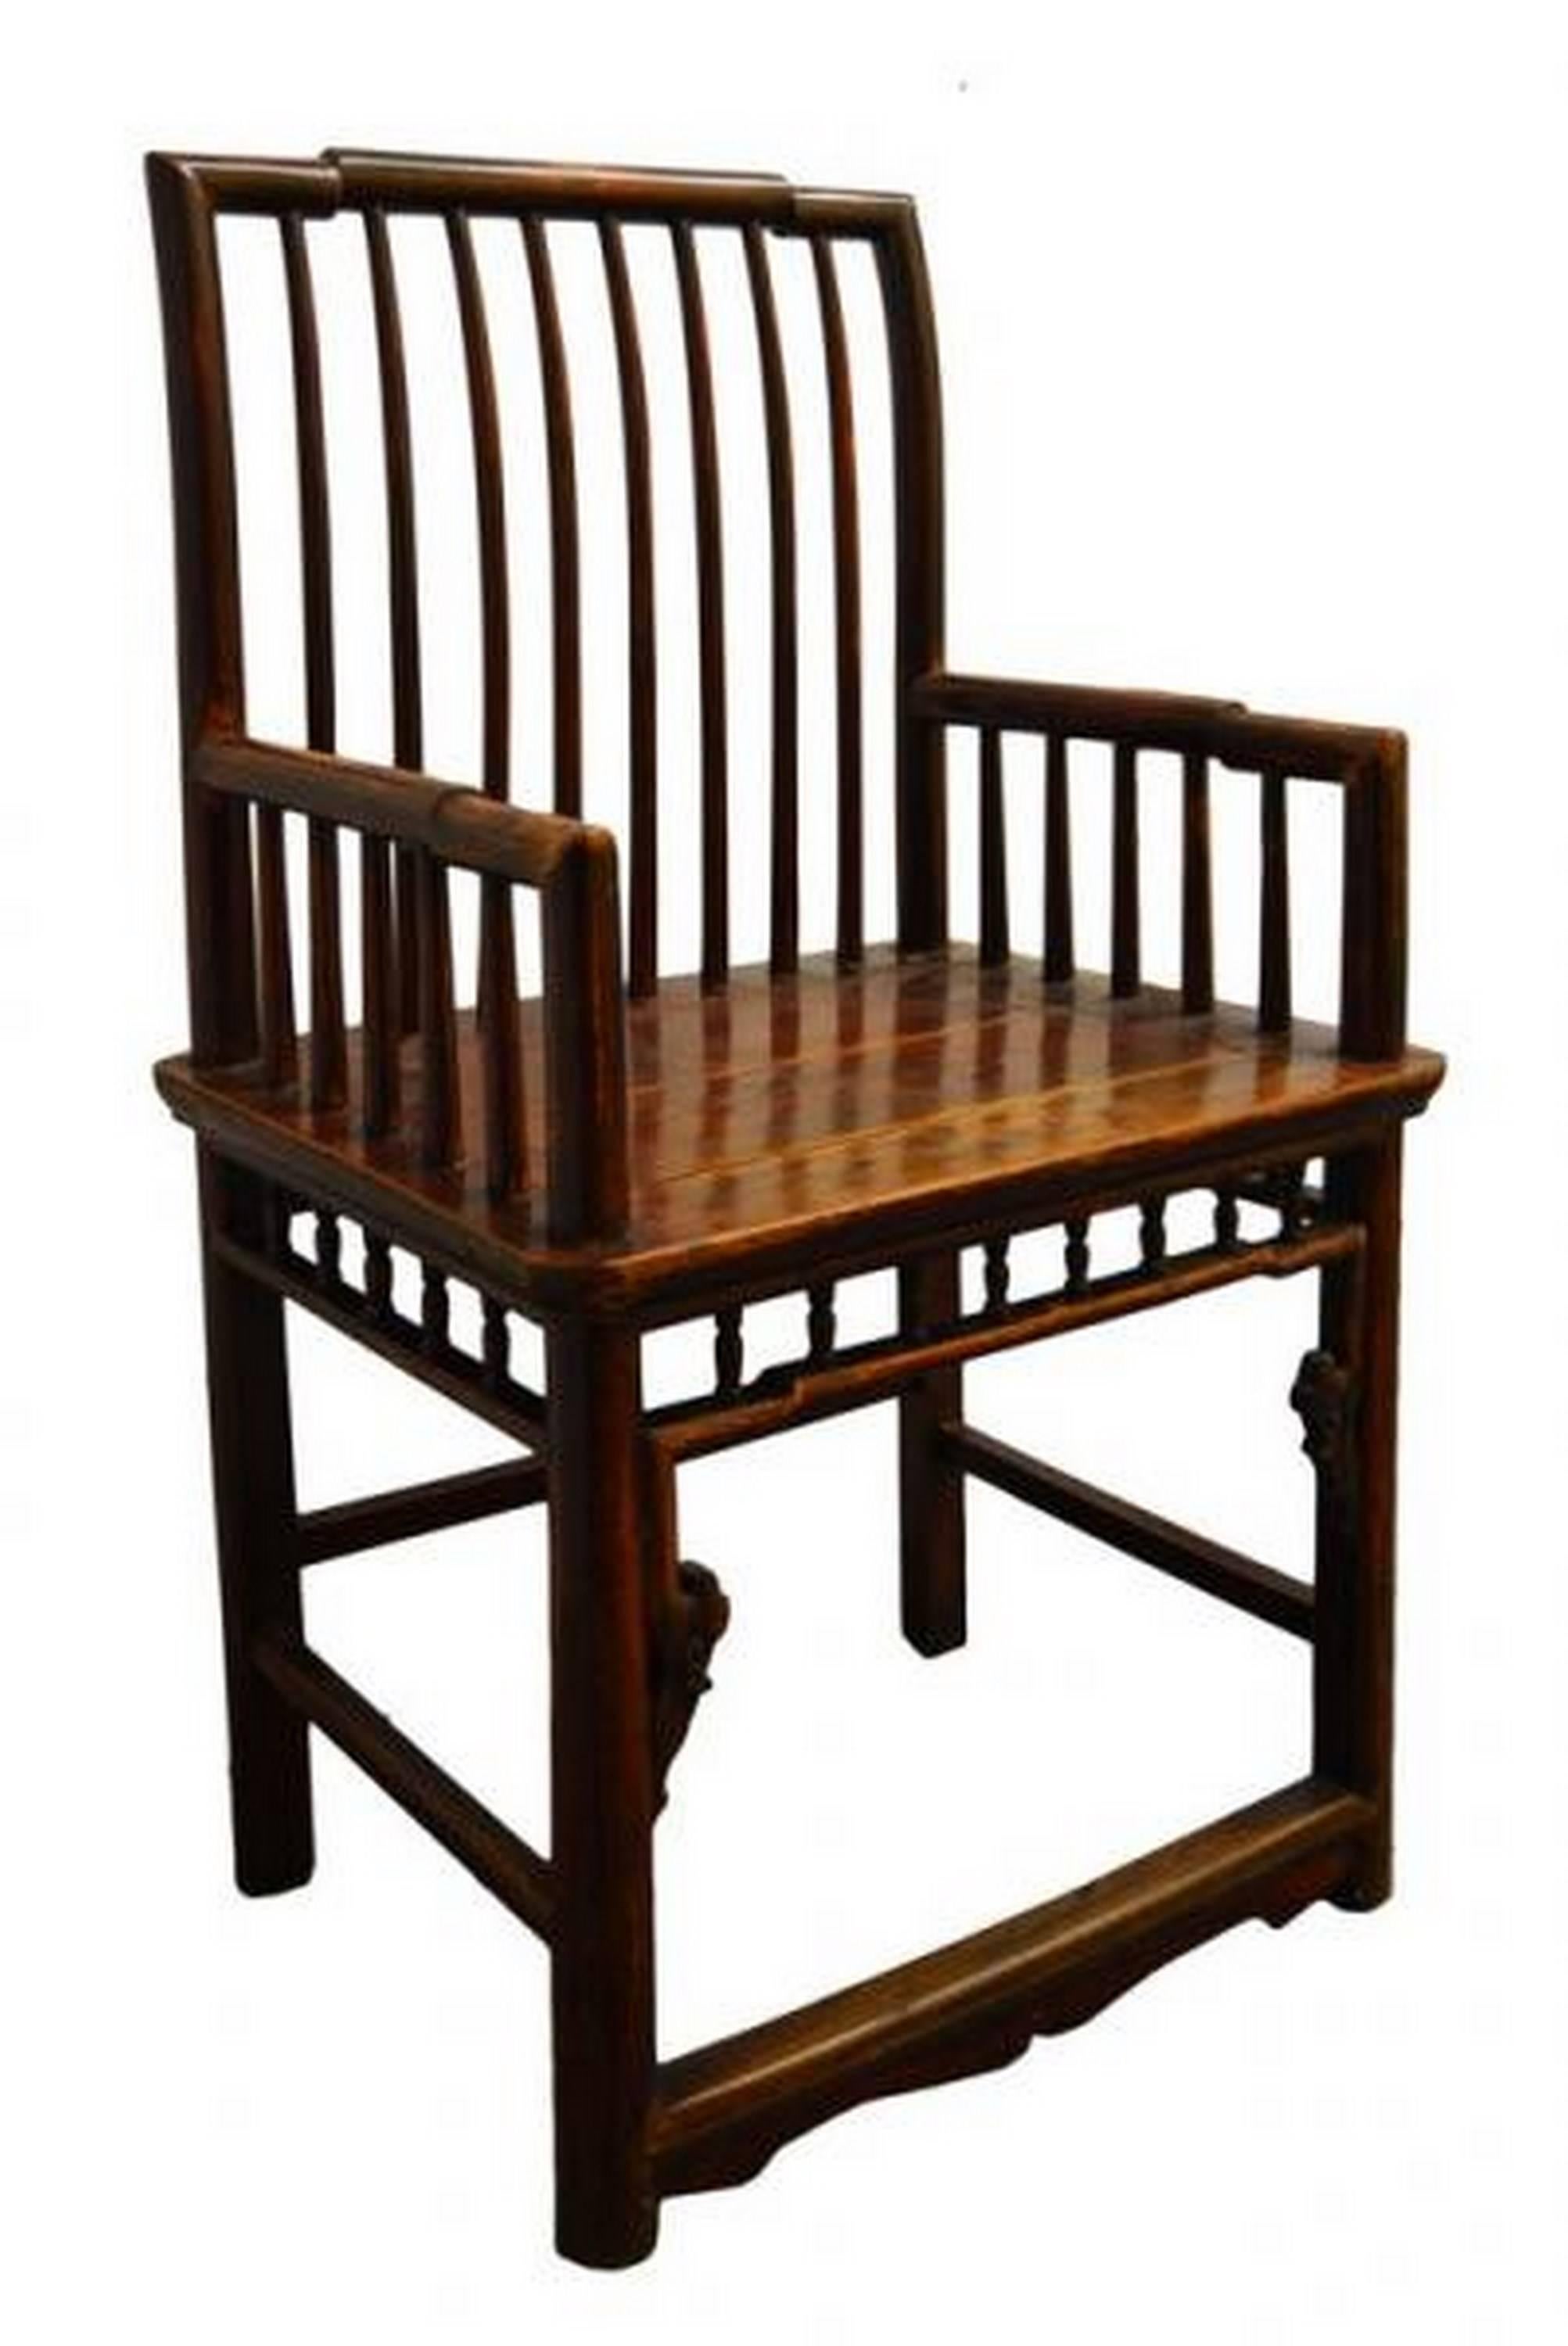 This Chinese 19th century side chair was made with dark brown lacquered wood. This chair features an openwork slatted back and stepped armrests. The rectangular seat is made of varnished planks, connected to a lower stretcher thanks to small wooden